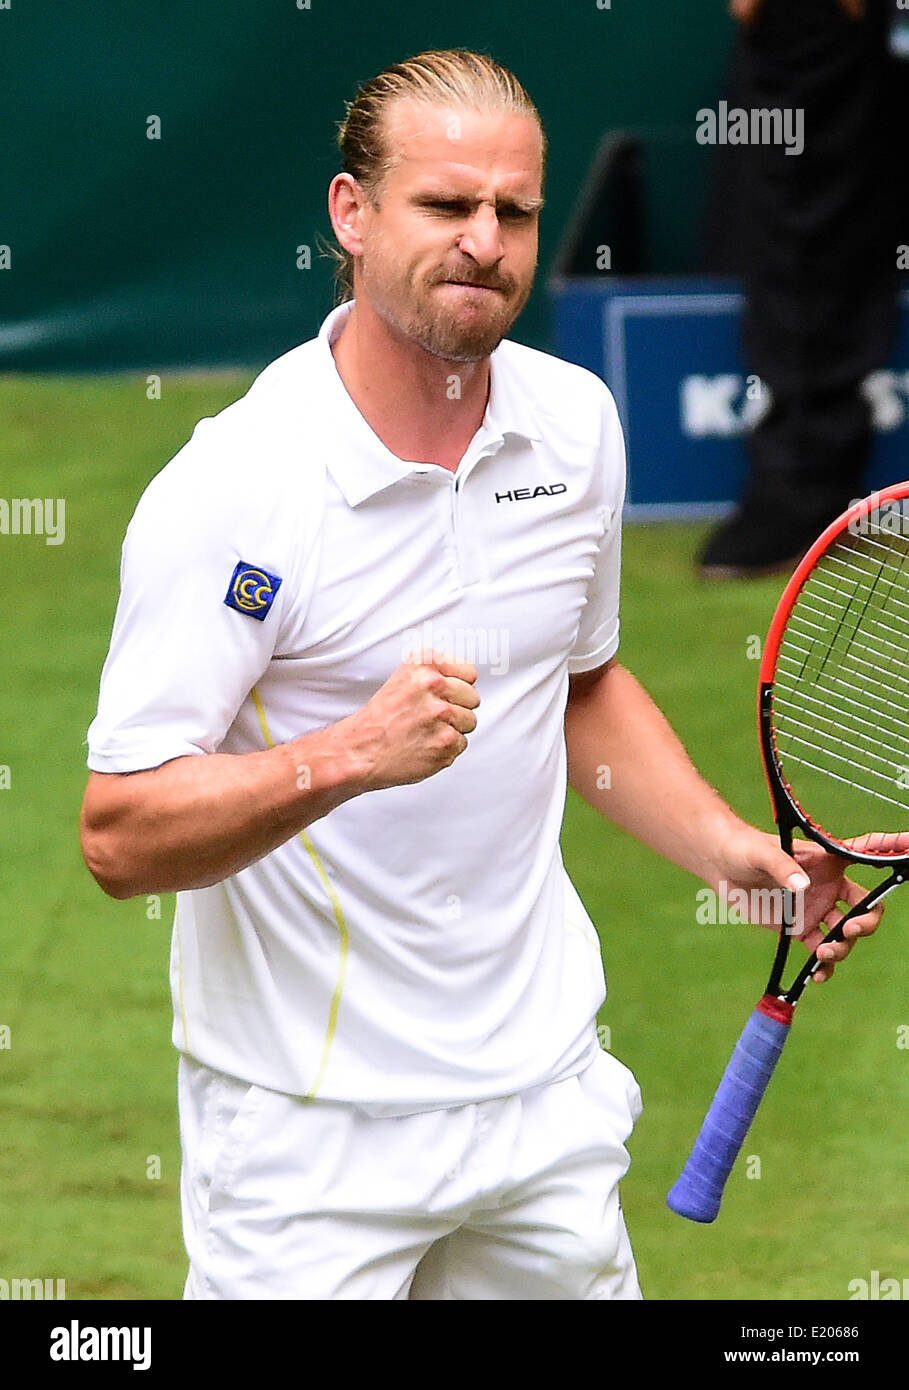 German tennis player Peter Gojowczyk reacts during the match against  Canadian tennis player Milos Raonic at